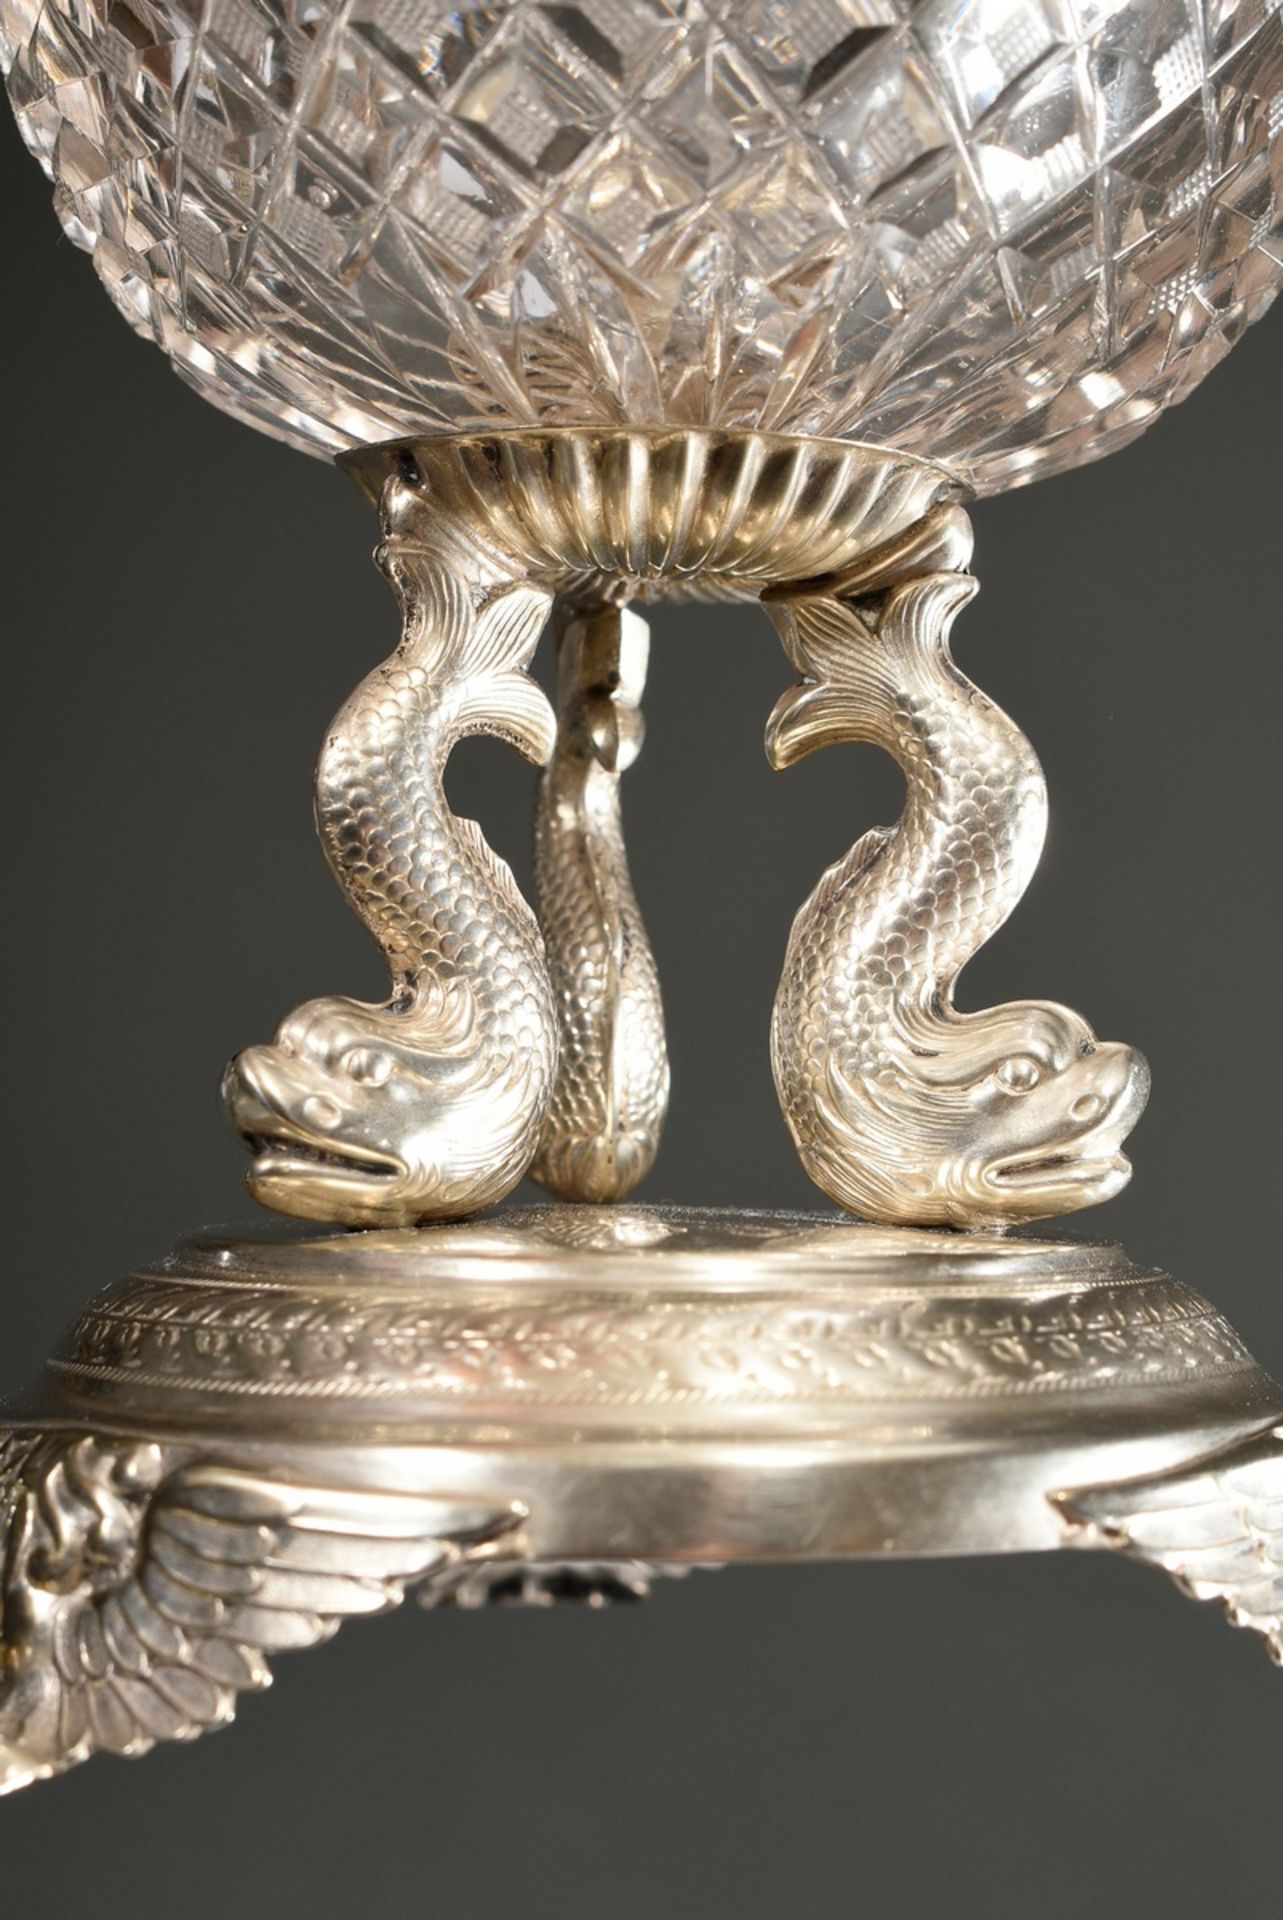 An Empire sugar bowl with a crystal bowl over 3 sculptural dolphins on a round foot with 3 winged p - Image 2 of 3